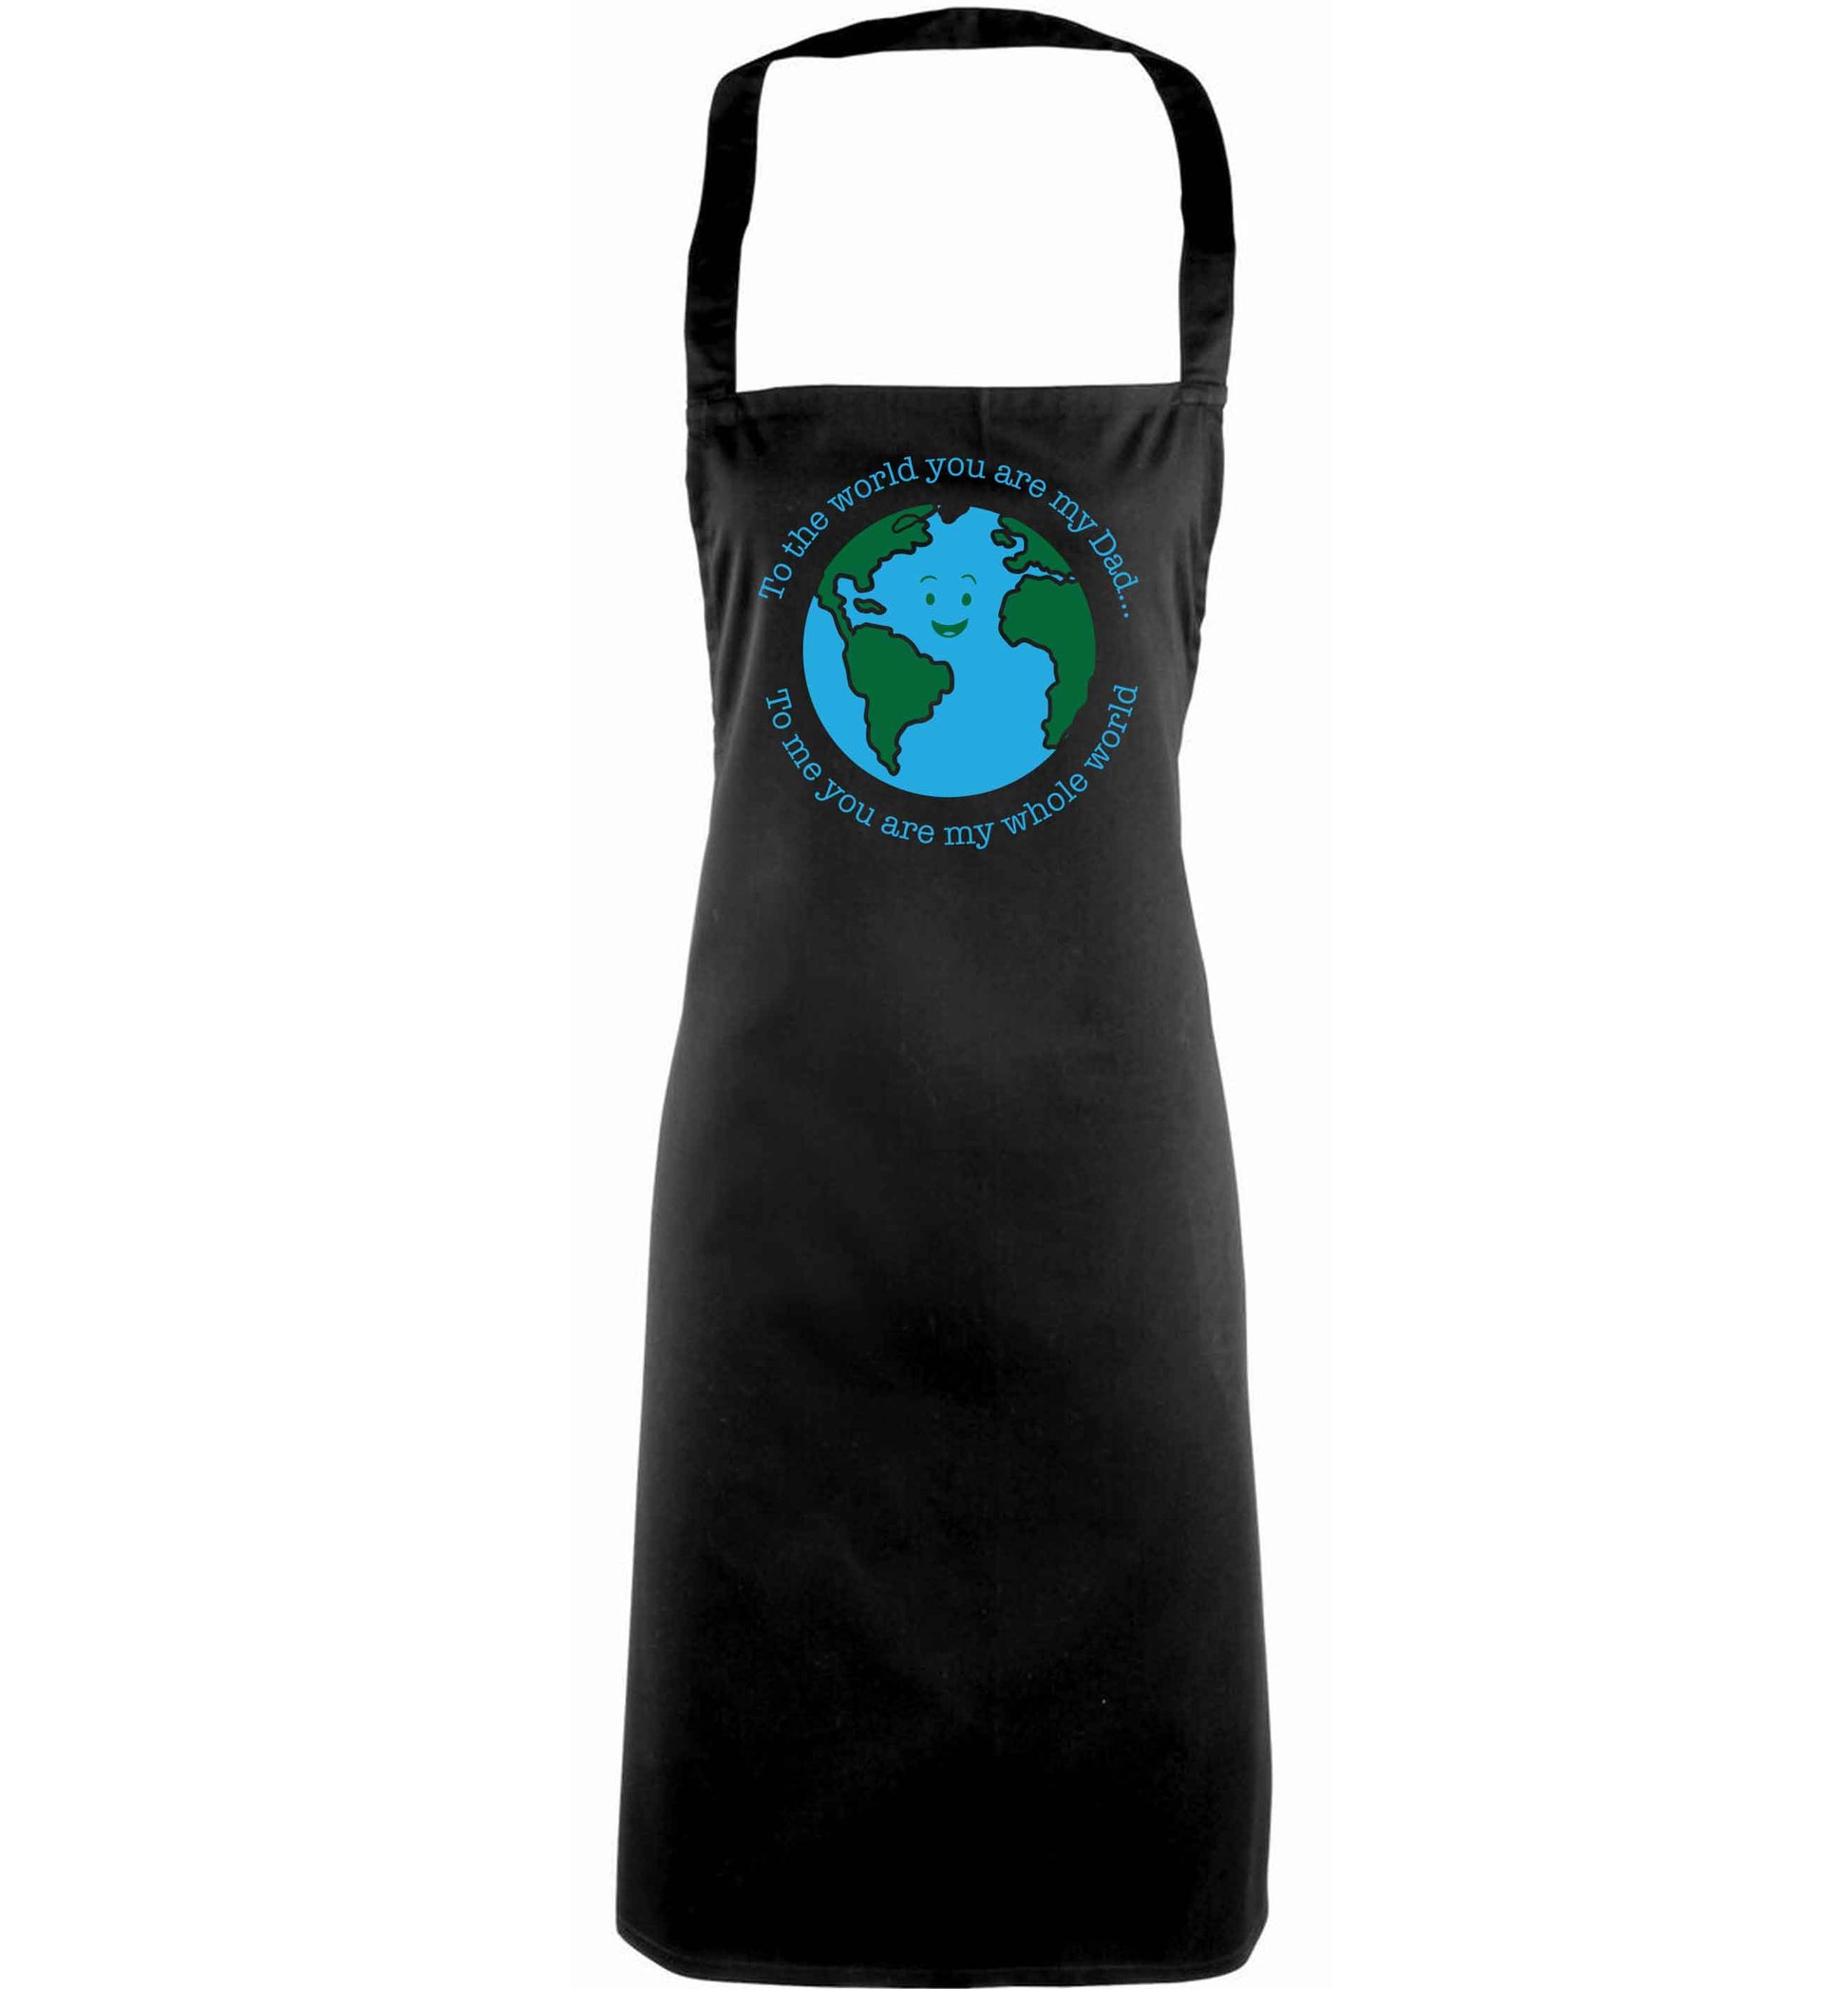 To the world you are my dad, to me you are my whole world adults black apron